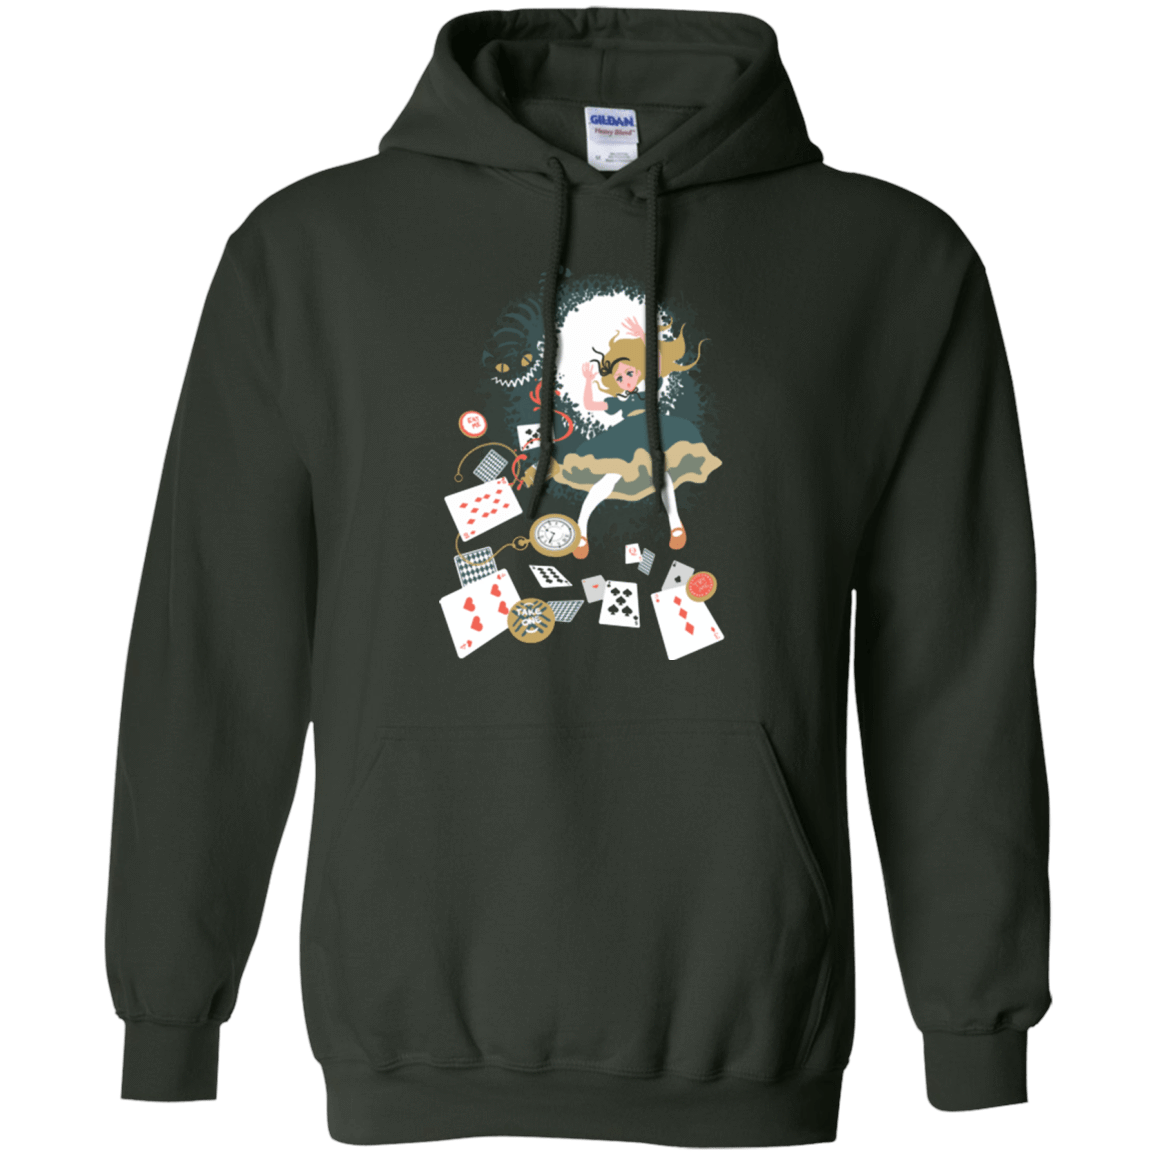 Sweatshirts Forest Green / Small Down the rabbit hole Pullover Hoodie